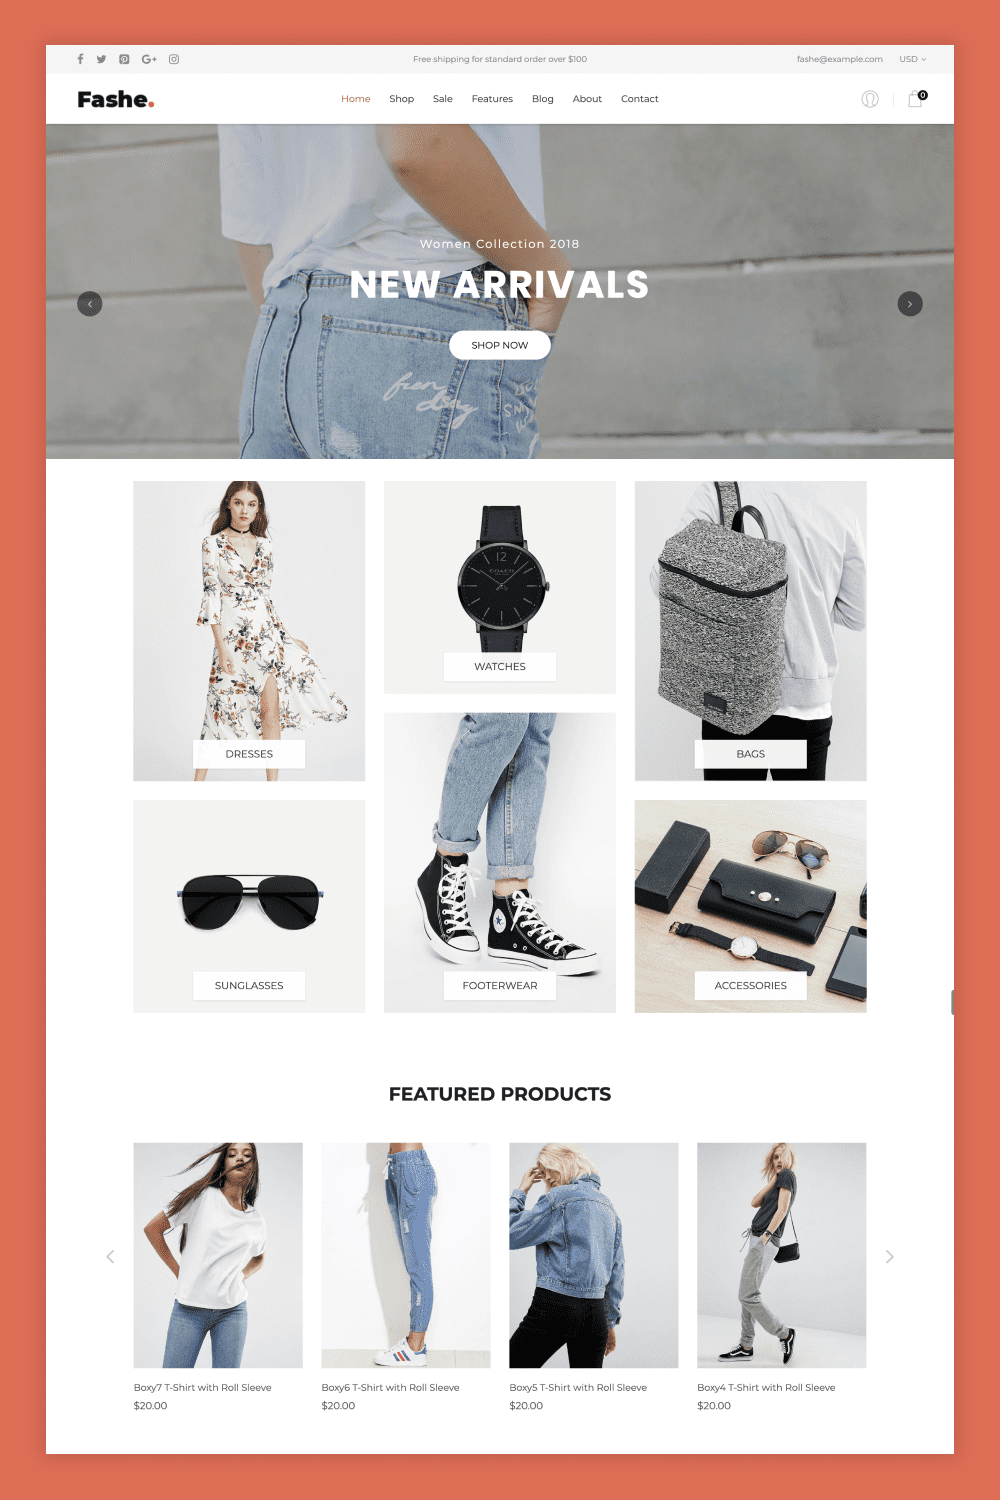 Main page of the online store of clothes, bags, shoes and accessories.